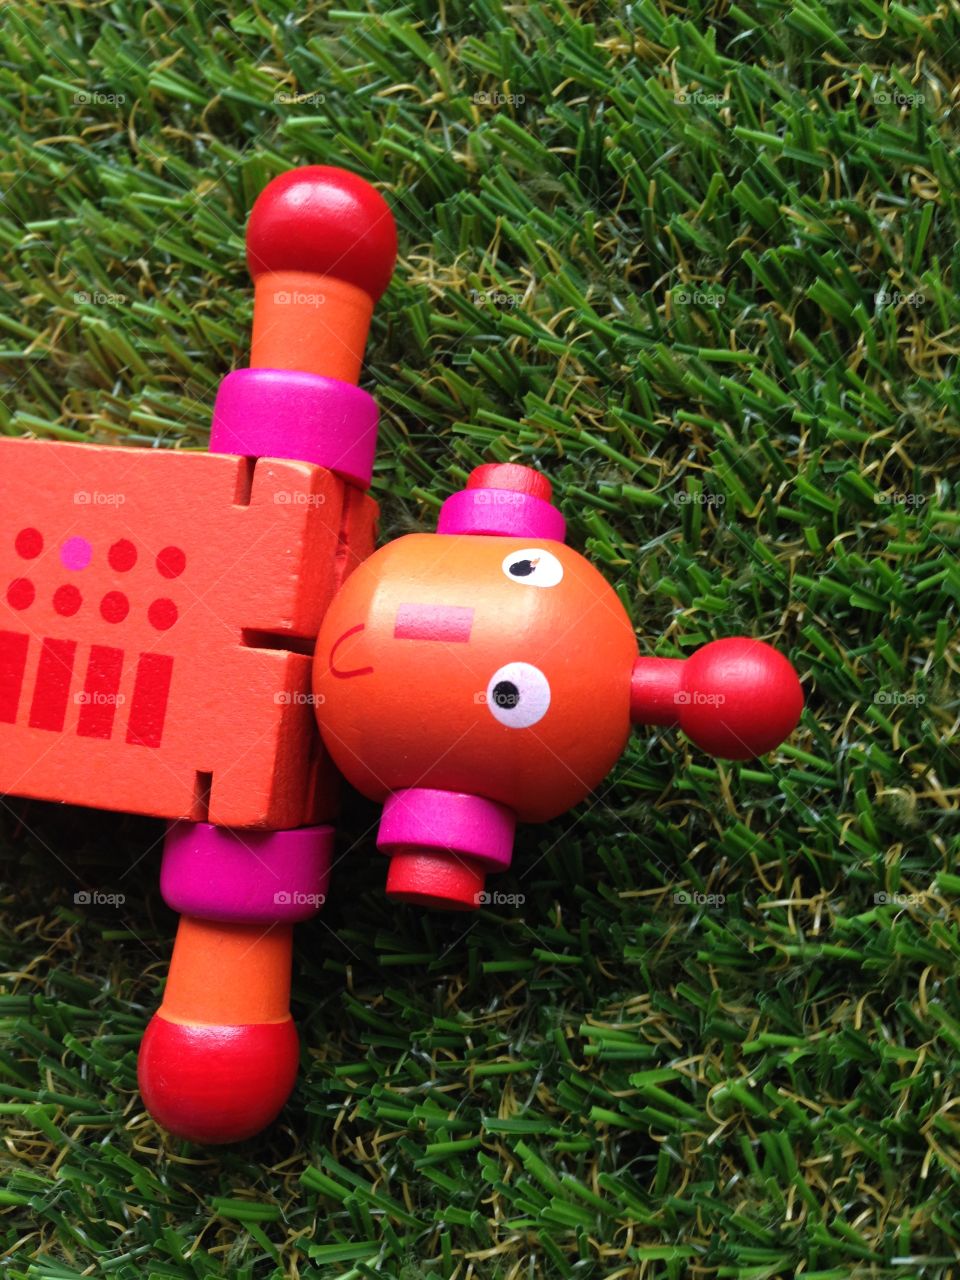 Robot toy left behind on grass